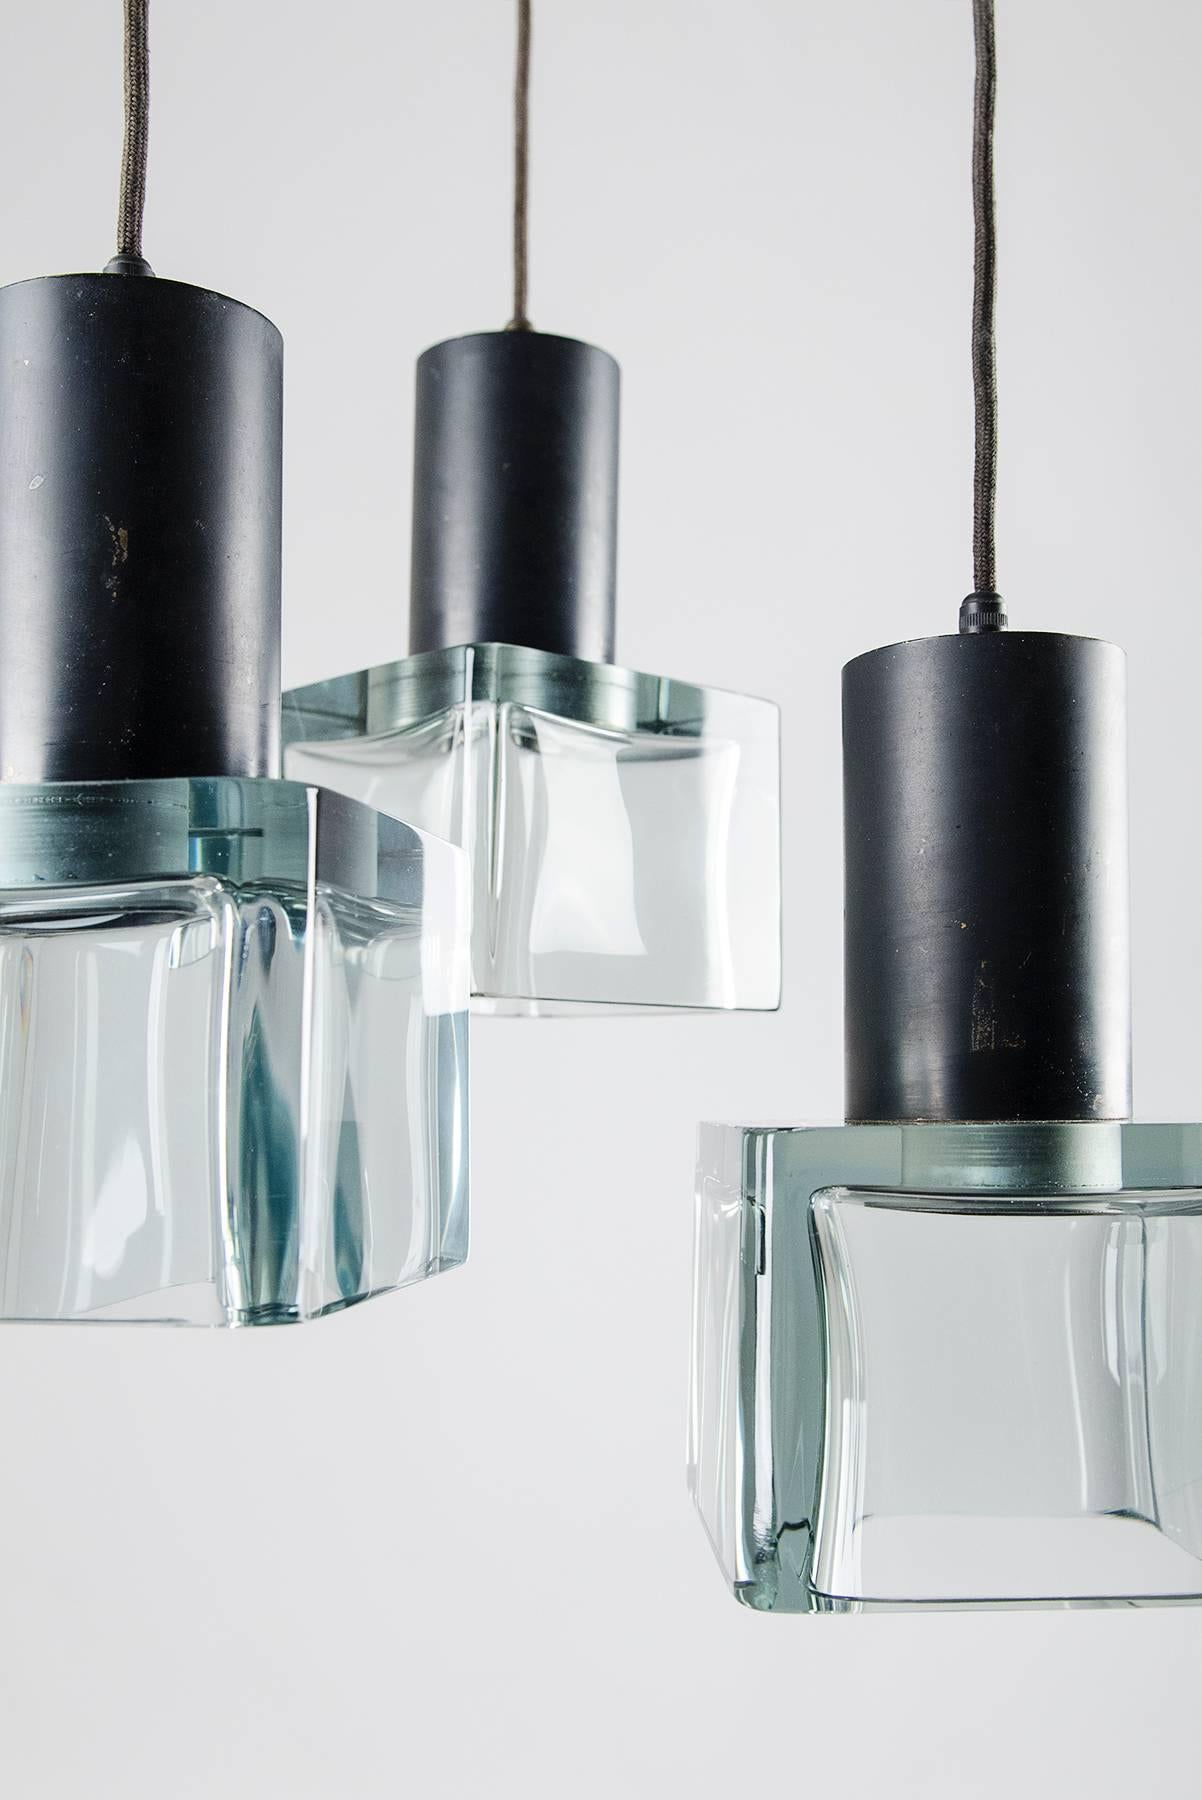 Three-pendant chandelier manufactured by Seguso, Italy, in the 1960s. Massive Murano glass diffusers with black lacquered metal structures. The height of the pendants can be adjusted according to need. The dimensions of each pendant are cm 13 x 13 x